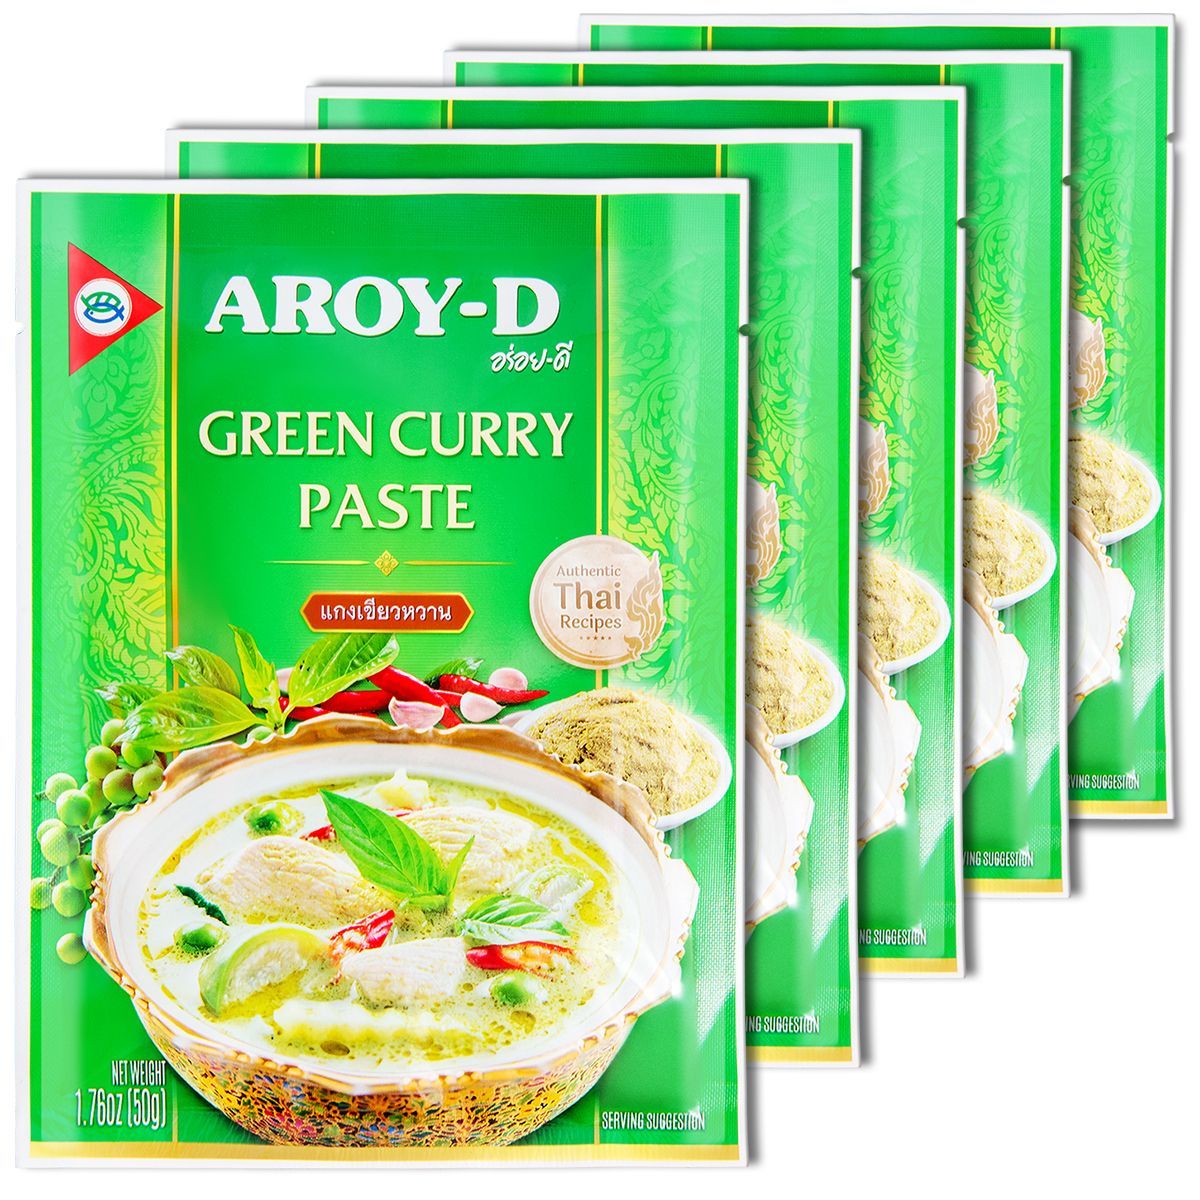 Green Curry paste. Паста Грин карри. Паста карри aroy d